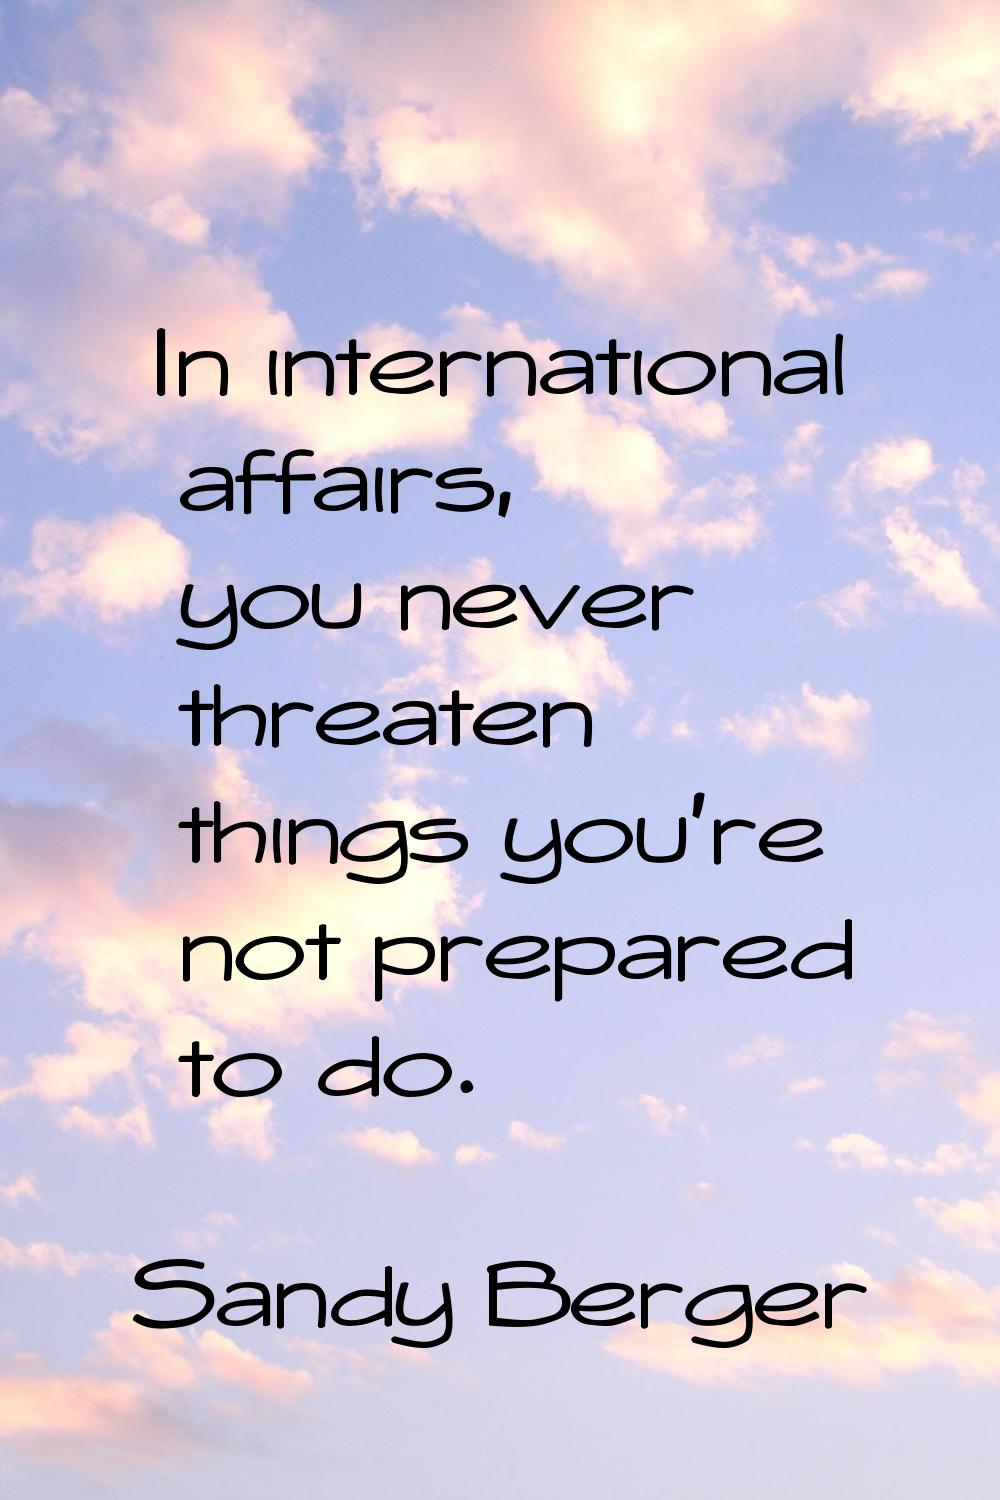 In international affairs, you never threaten things you're not prepared to do.